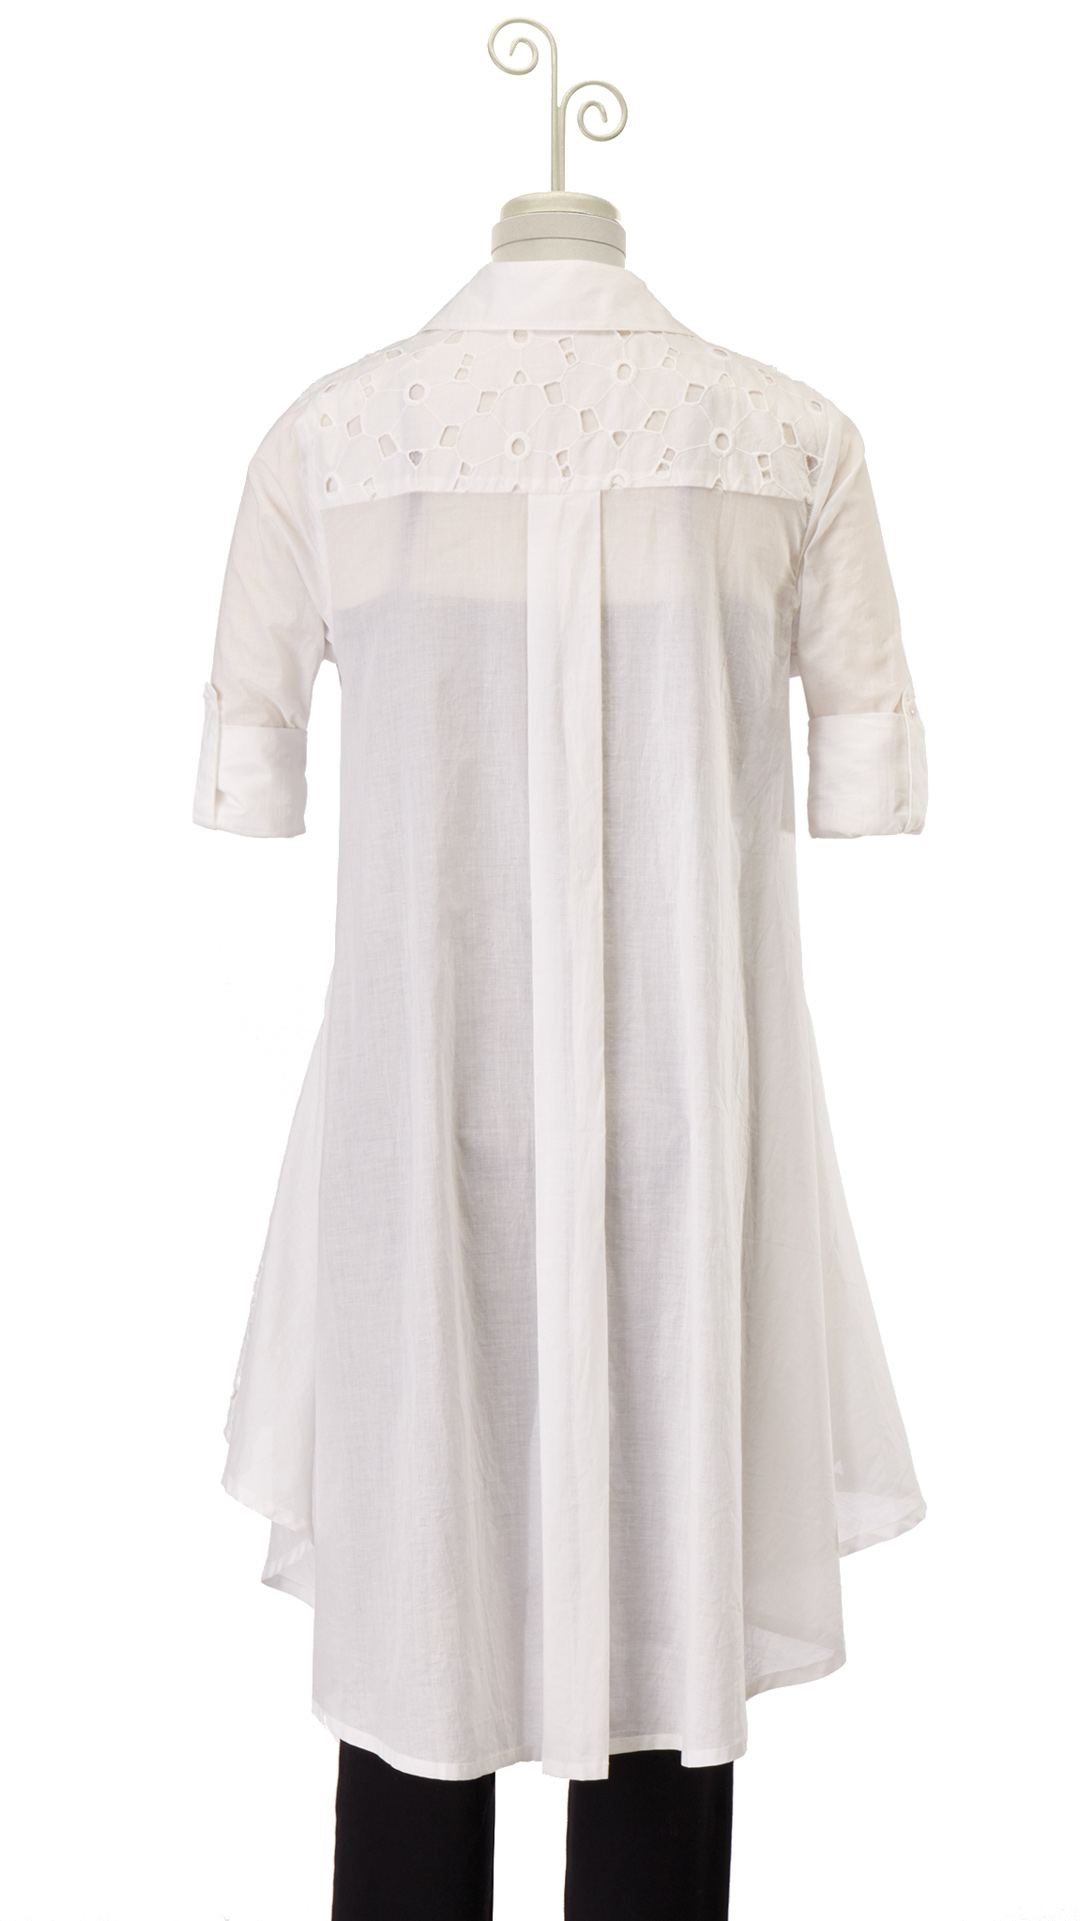 Back view of a mannequin displaying a white cutwork button-shirt tunic with an asymmetrical hem.